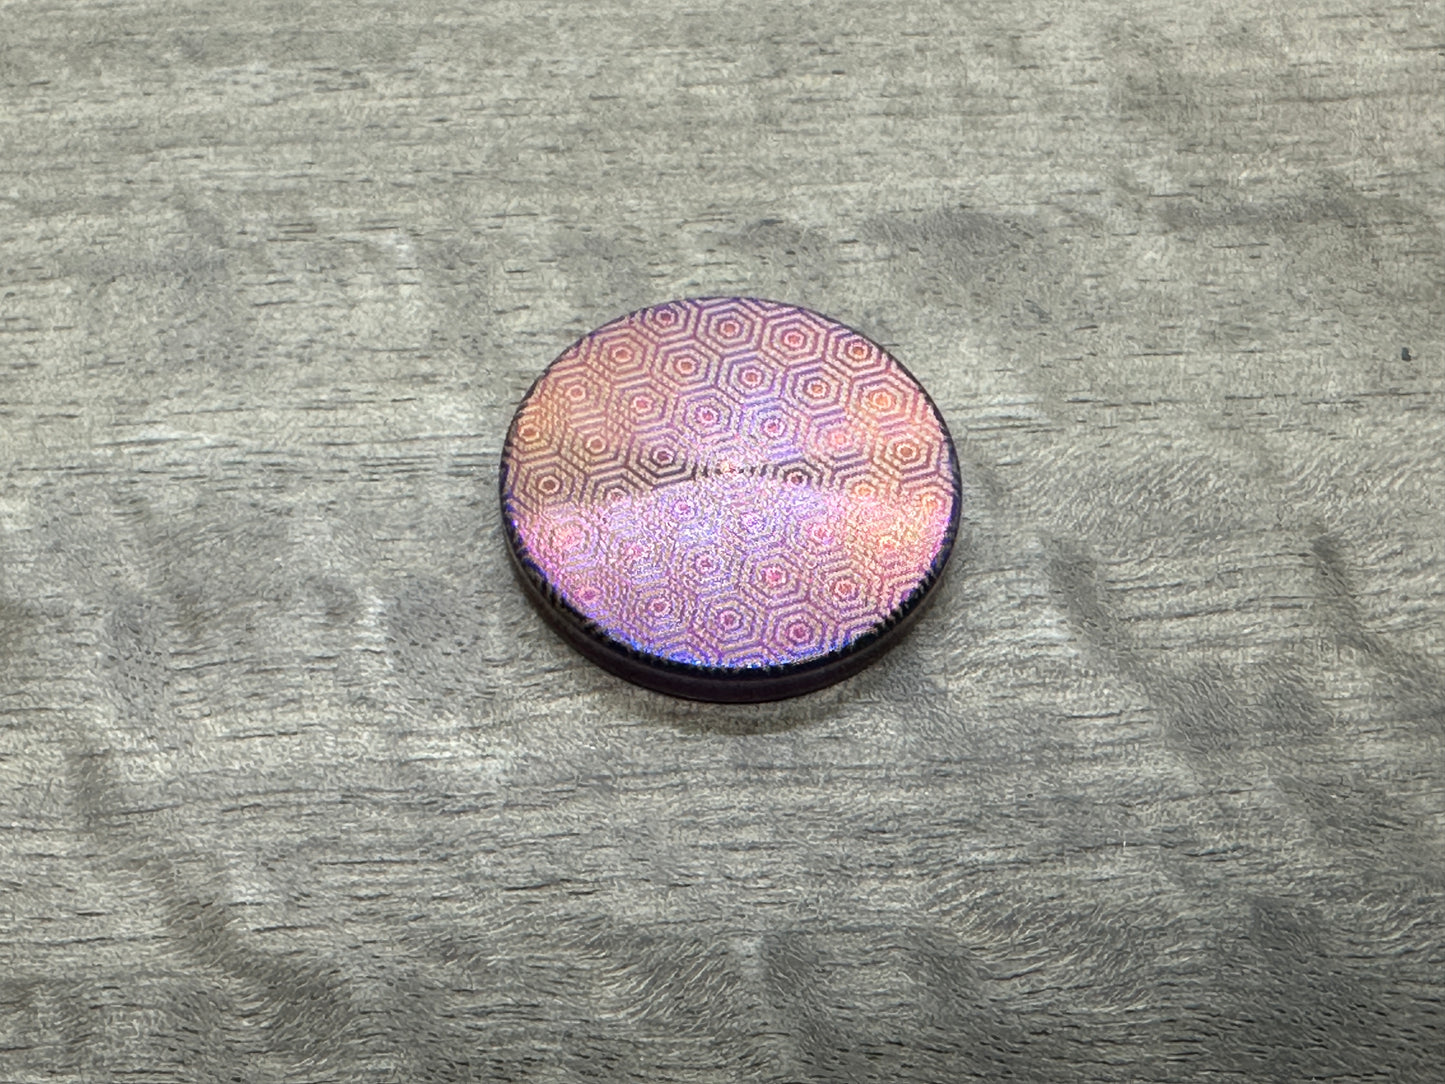 Flamed LIBERTY Titanium Coin for Billetspin GAMBIT